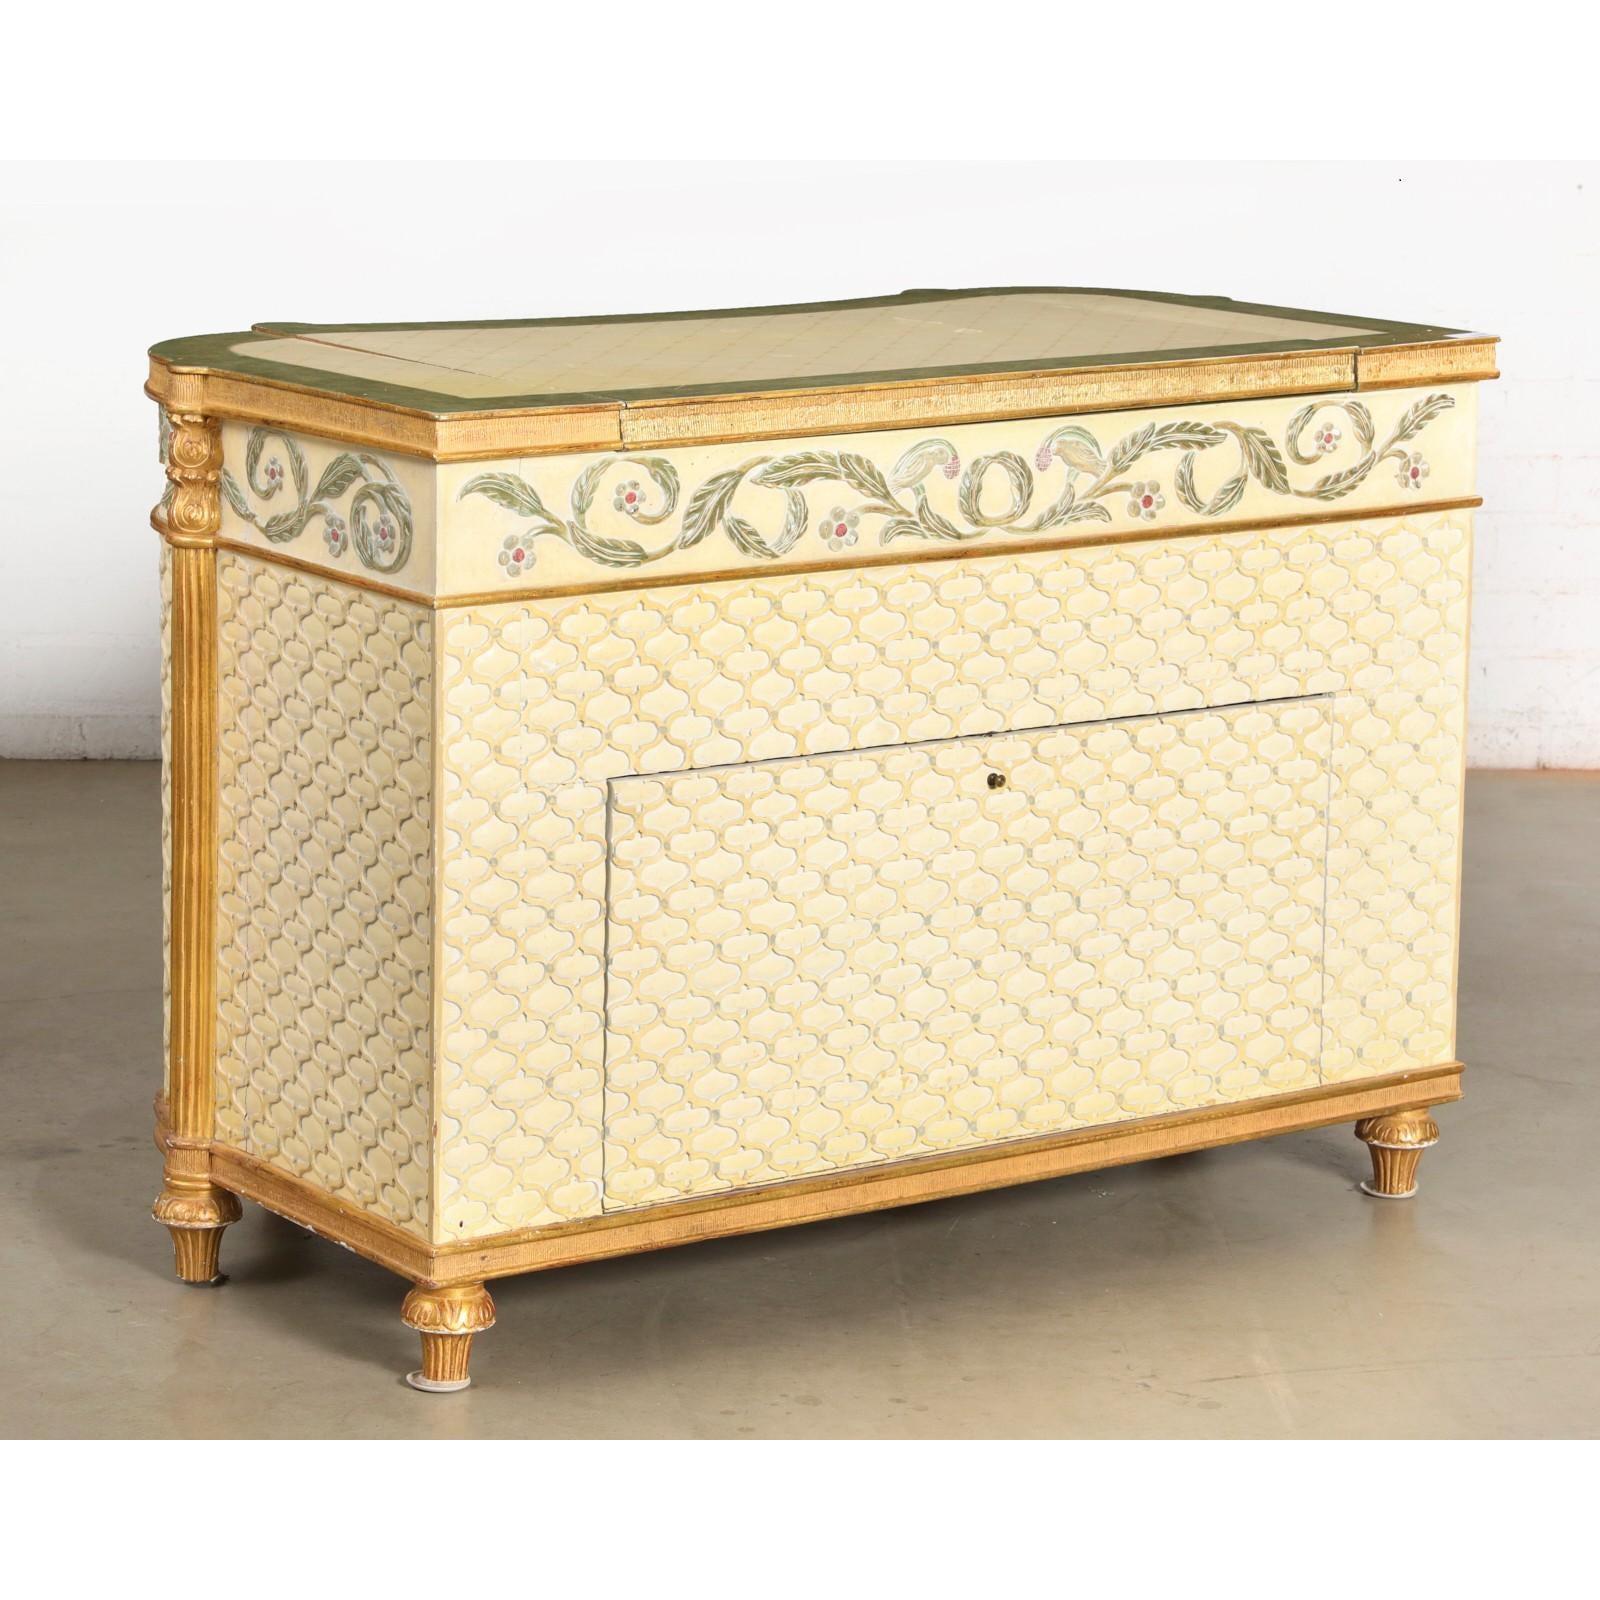 Suzanne Geismar Giltwood Blue & White Paint Decorated Commode / Television Cabinet. With remote activated lift.

Additional information:
Materials: Giltwood, Paint
Color: Cream
Brand: Vermillion
Period: 1990s
Styles: Louis XVI, Neoclassical
Item